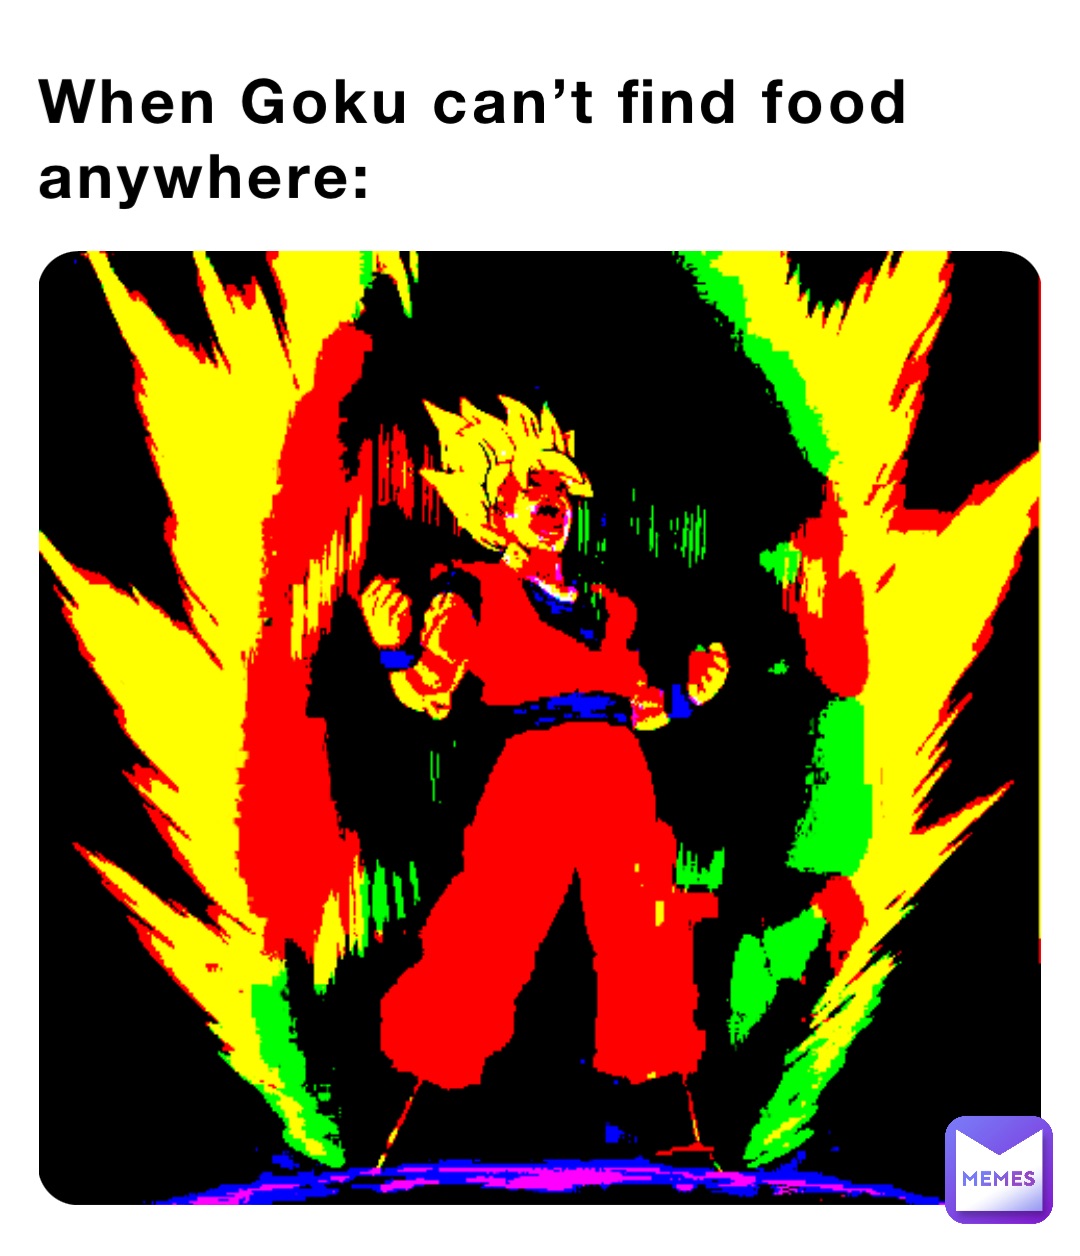 When Goku can’t find food anywhere: